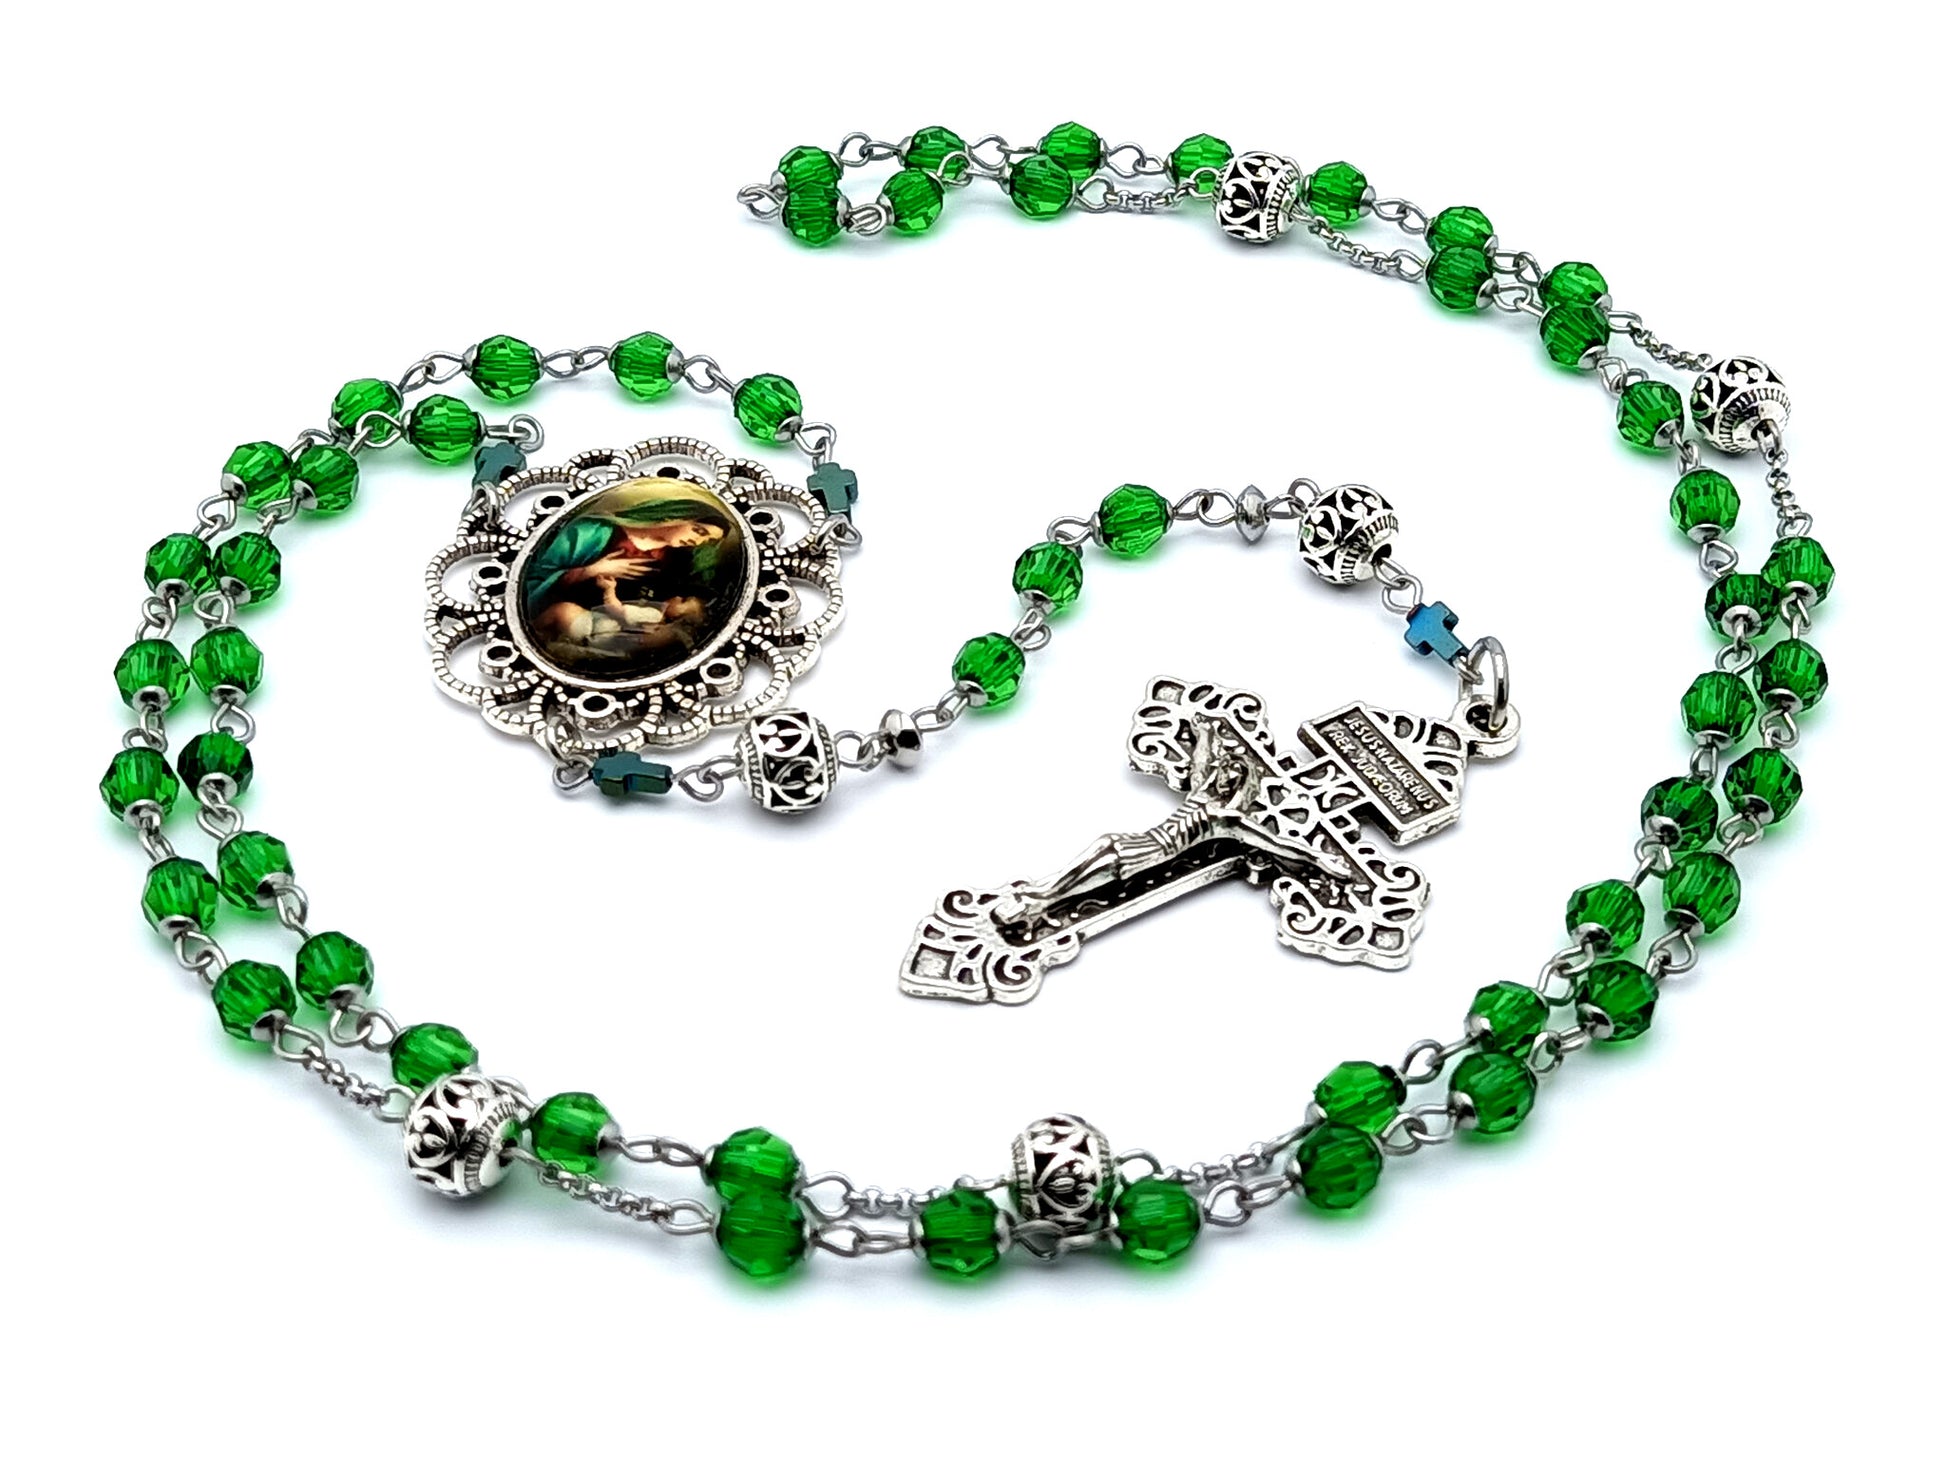 Virgin Mary and child Jesus unique rosary beads with faceted glass beads and silver pardon crucifix.